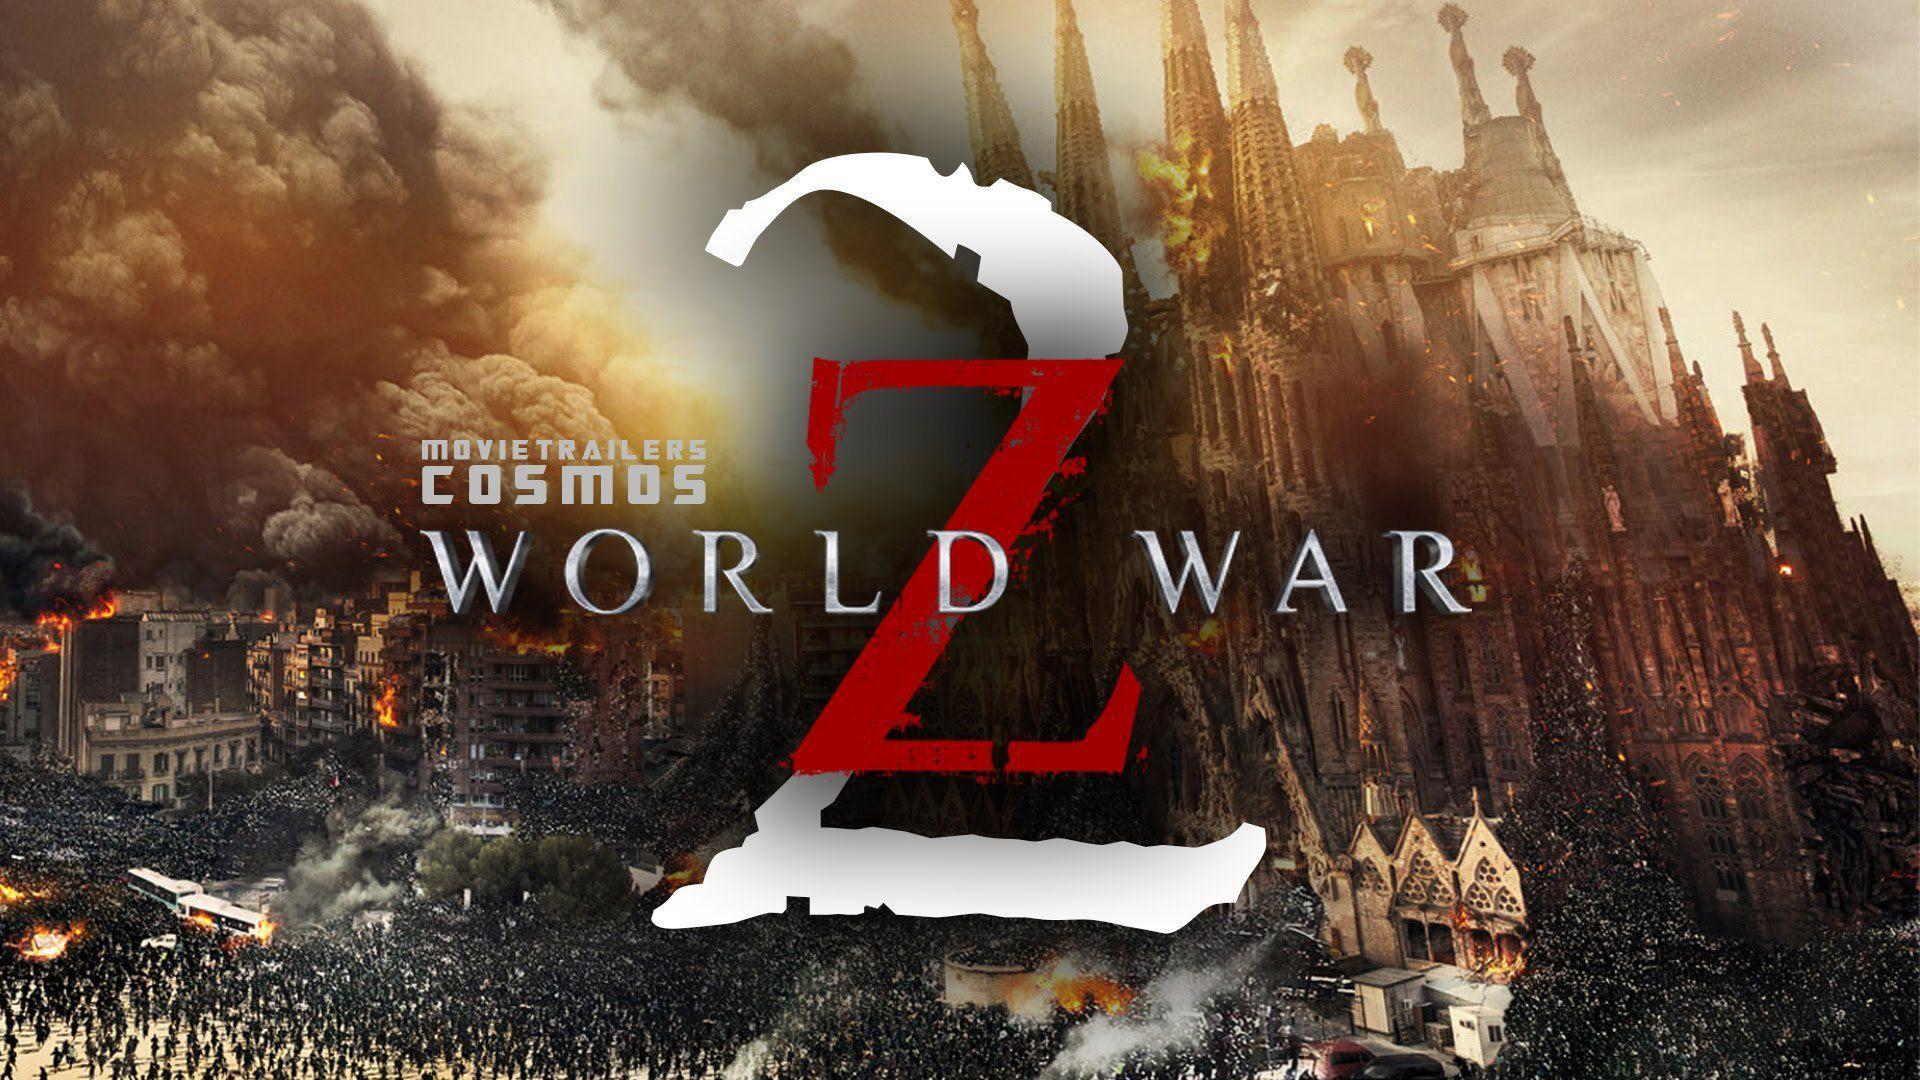 World War Z 2 Wallpapers Image Photos Pictures Backgrounds